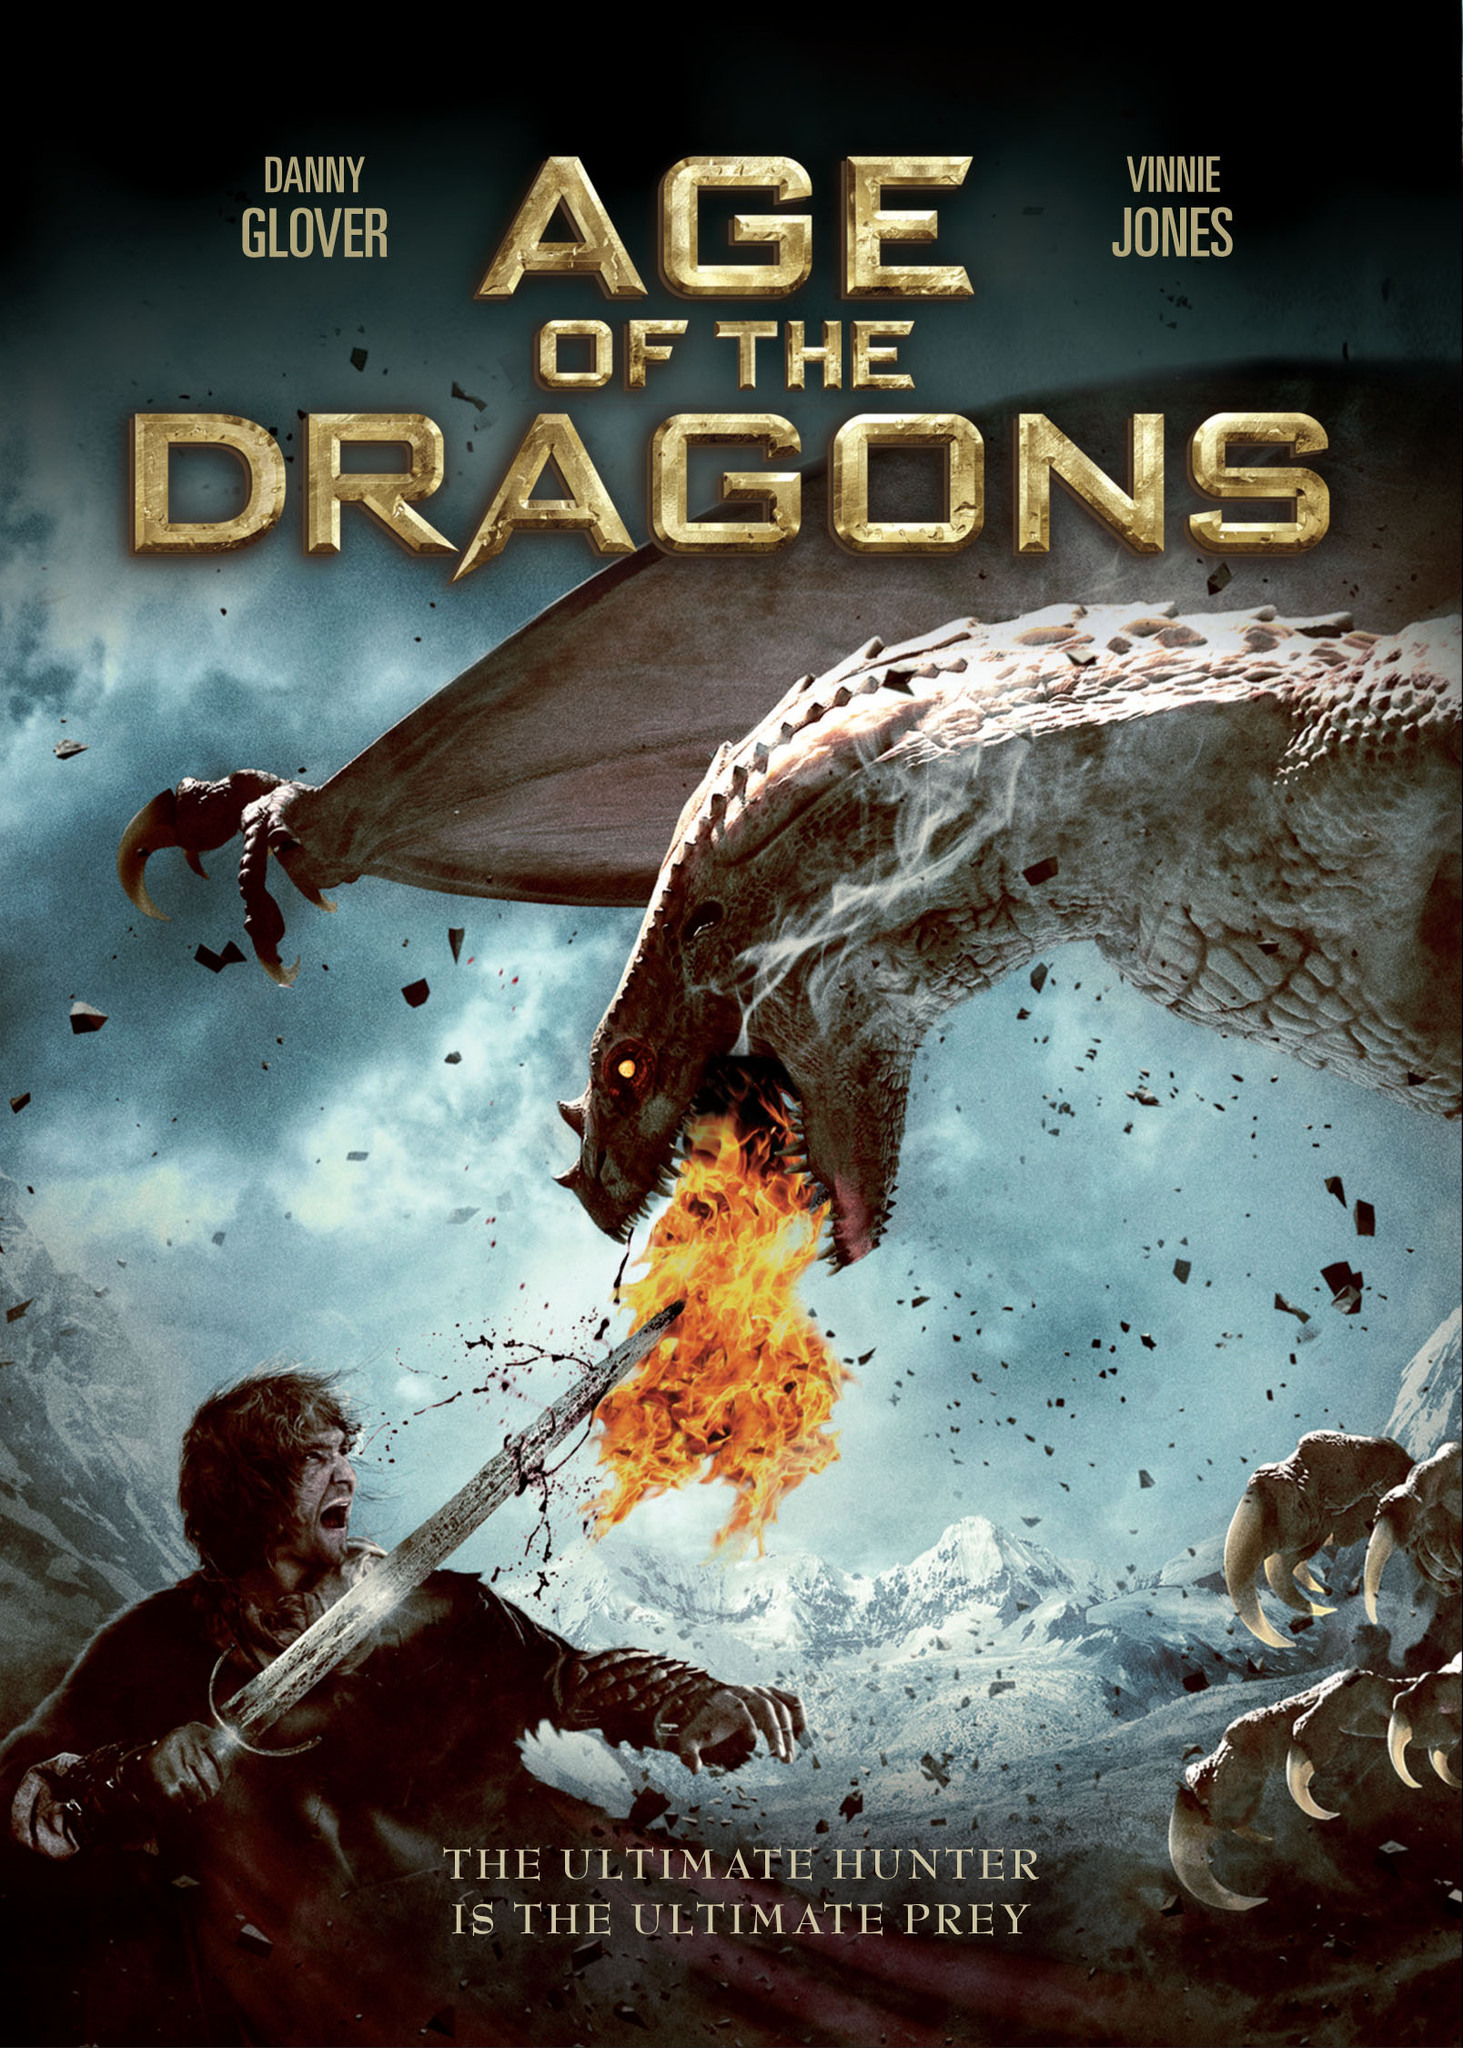 Age of the Dragons (2011) Screenshot 1